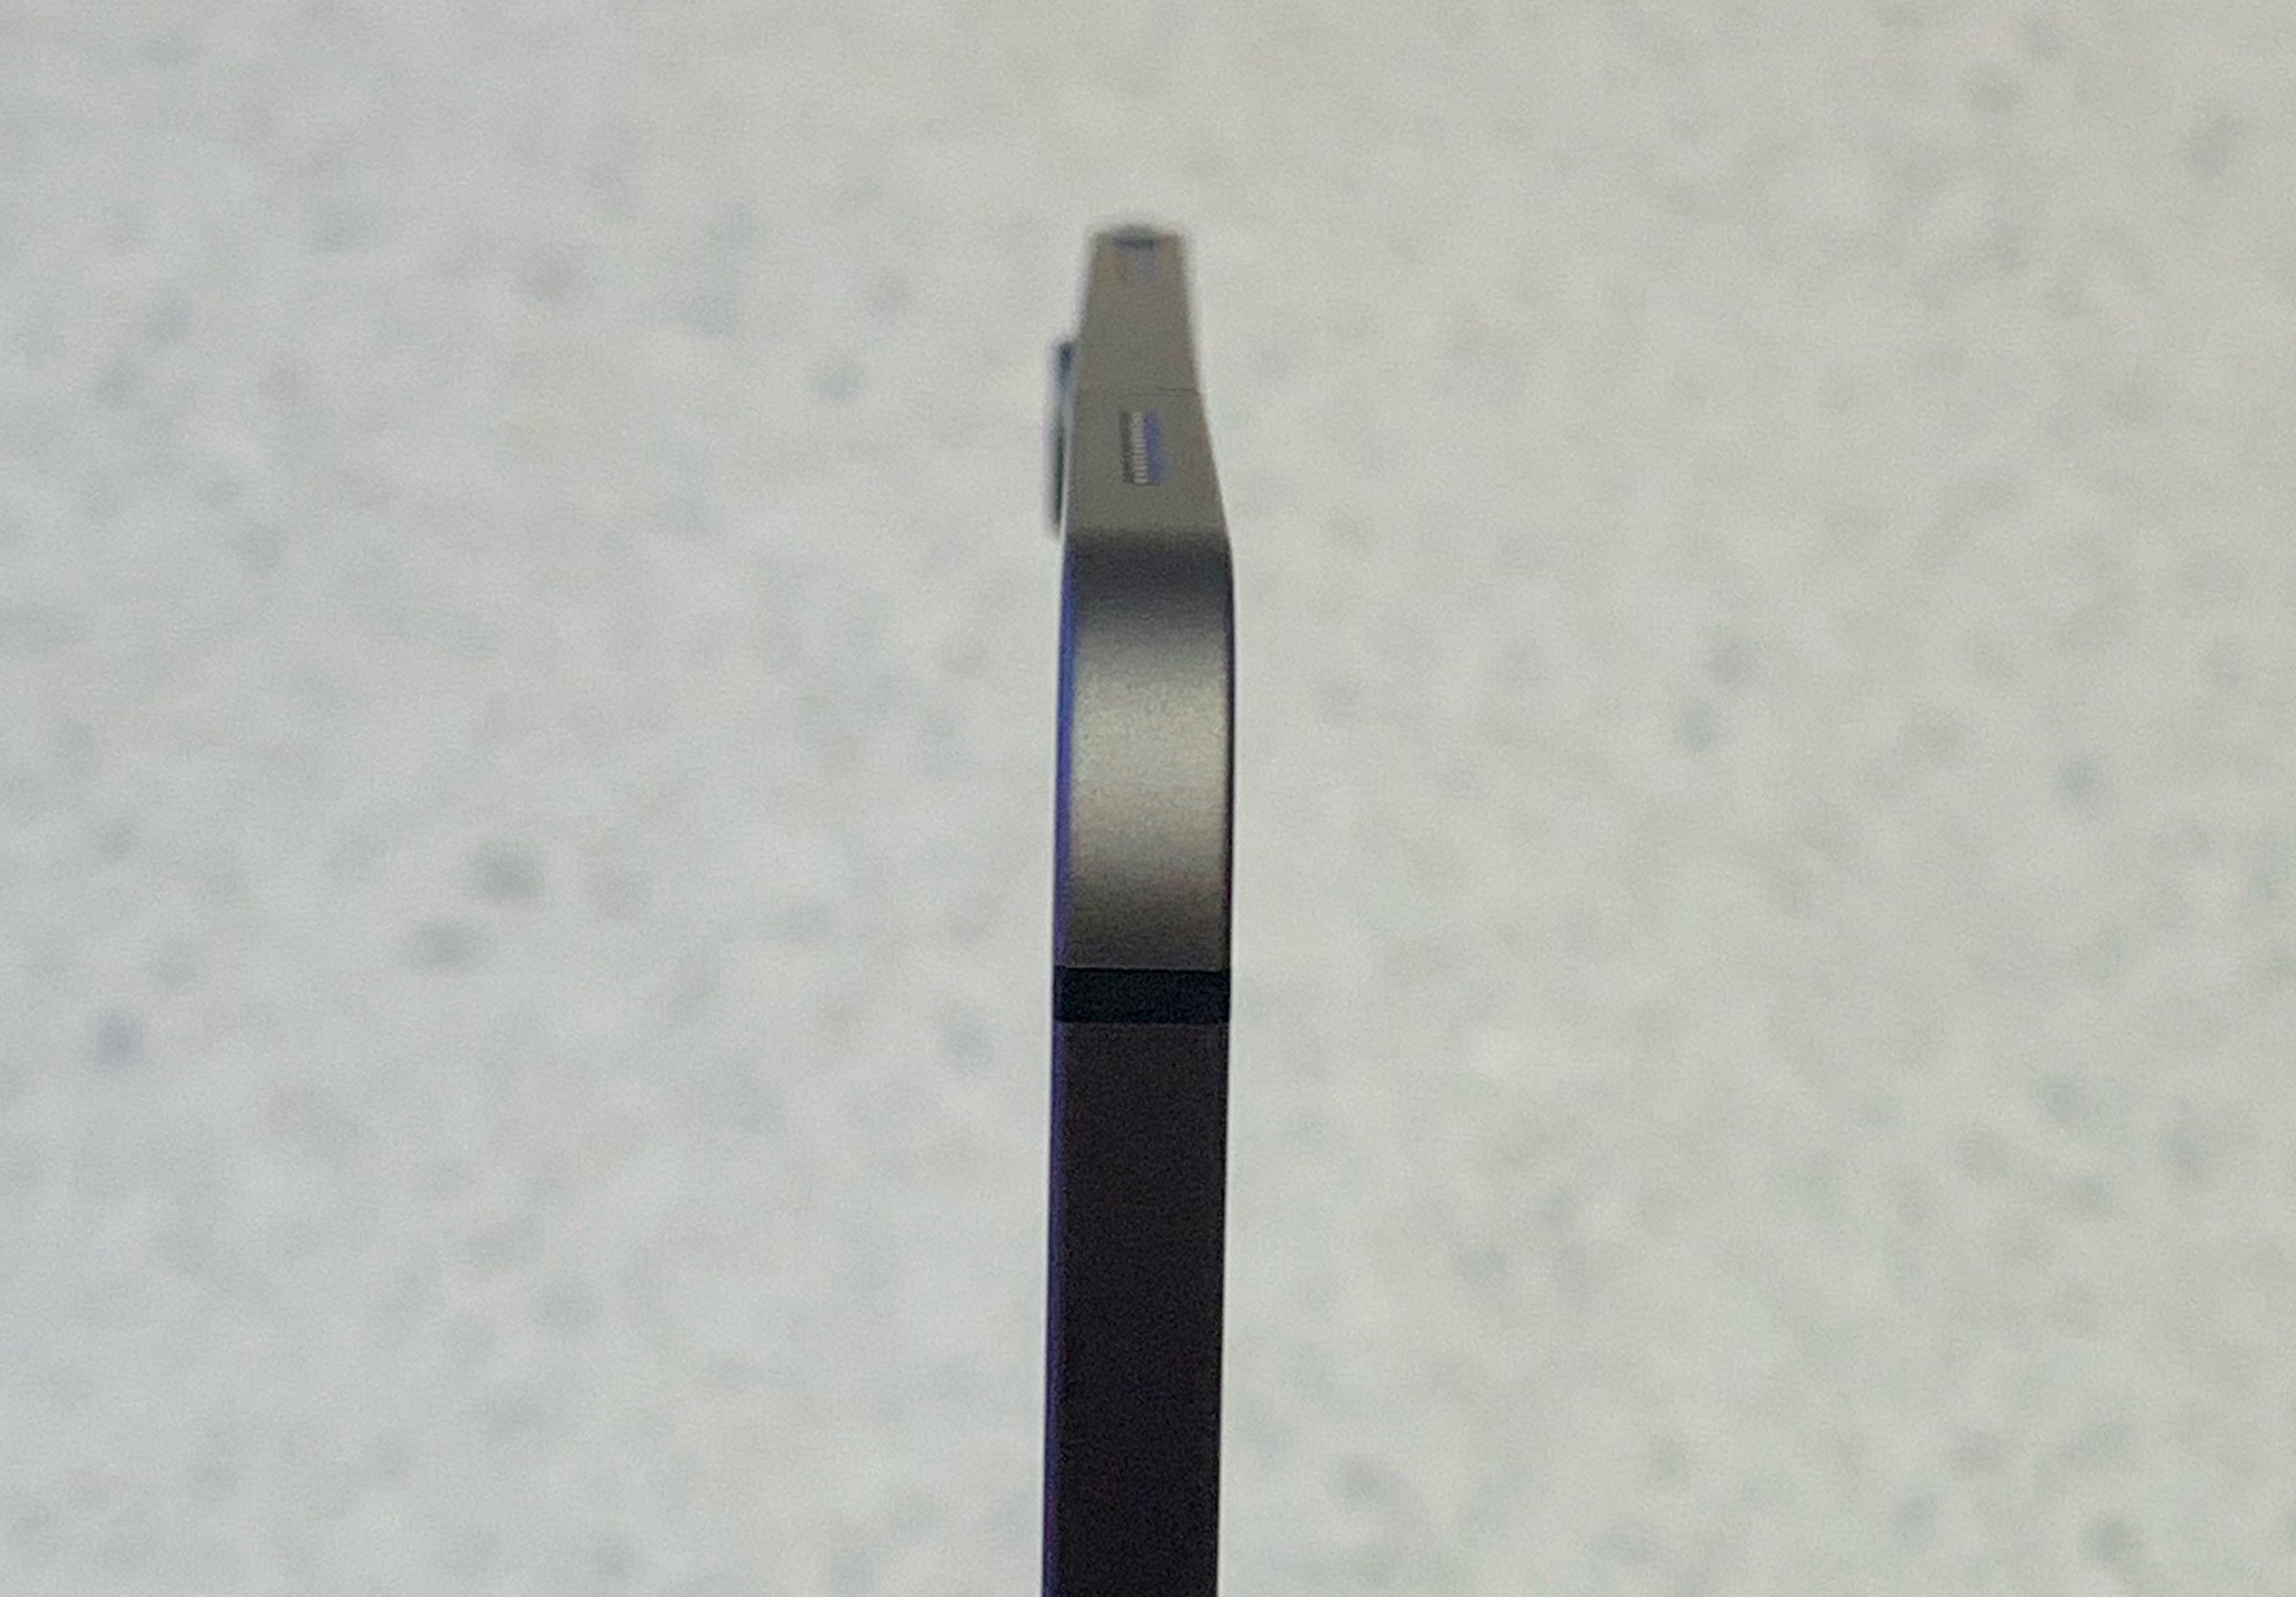 An 11-inch iPad Pro exhibited a very slight bend right out of the box.